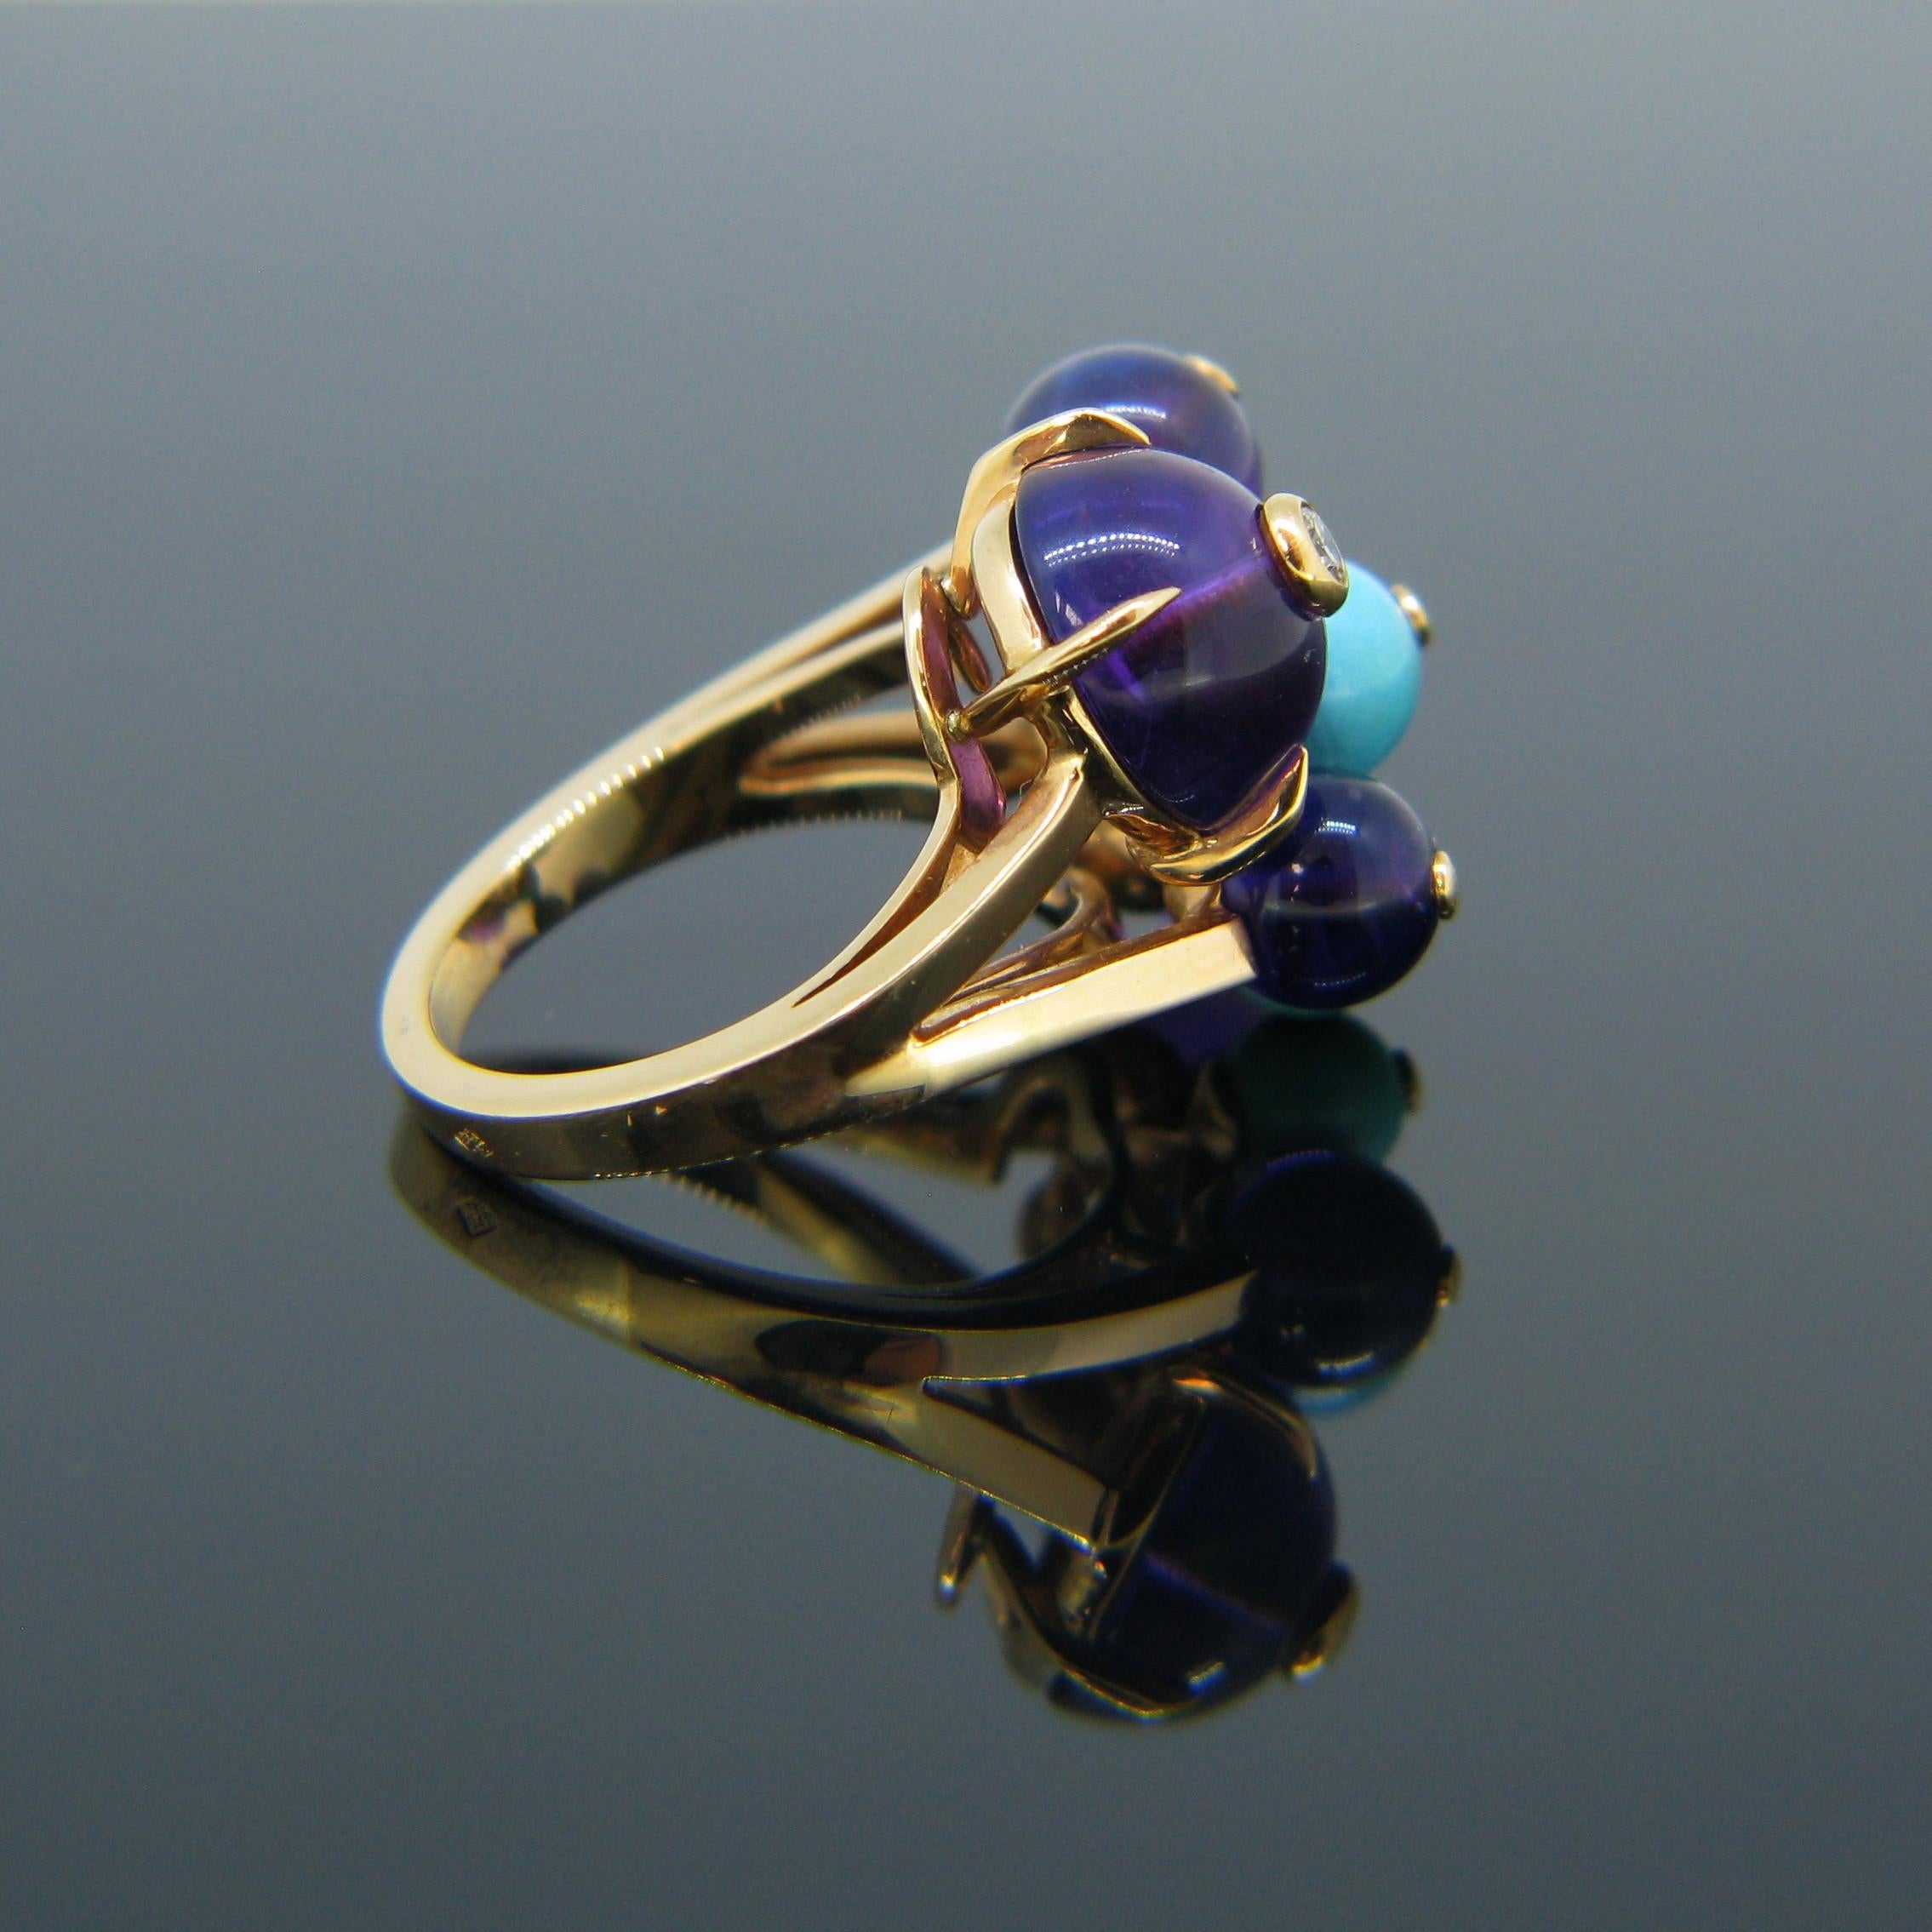 Round Cut Cartier Delices de Goa Amethyst Turquoise Diamond Rose Gold Cocktail Ring